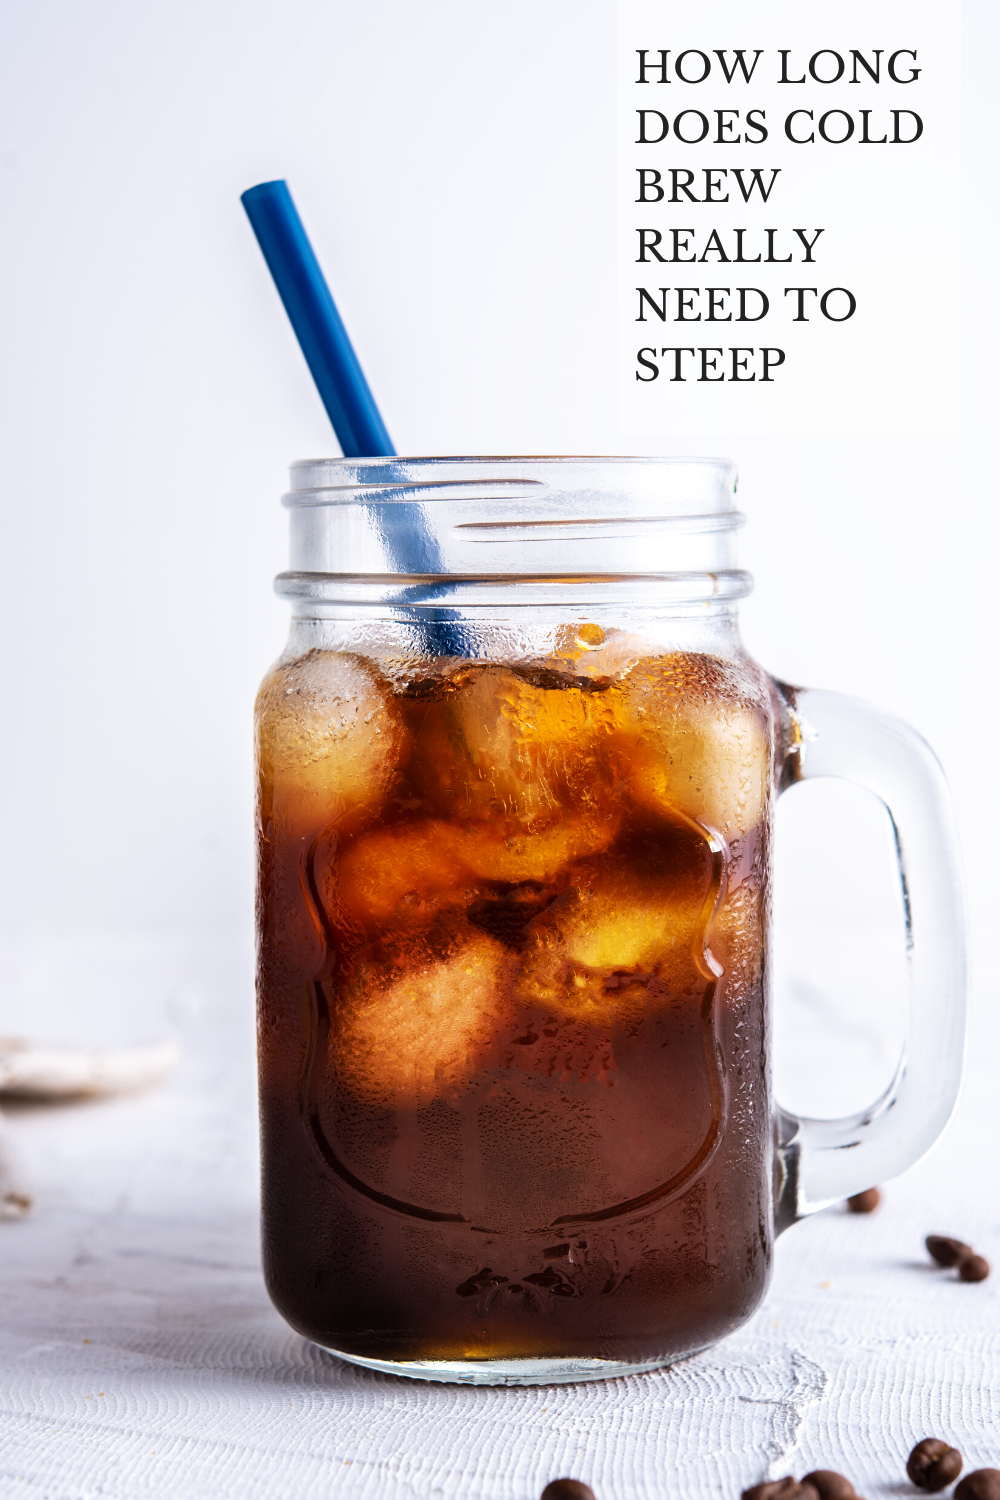 HOW LONG DOES COLD BREW REALLY NEED TO STEEP